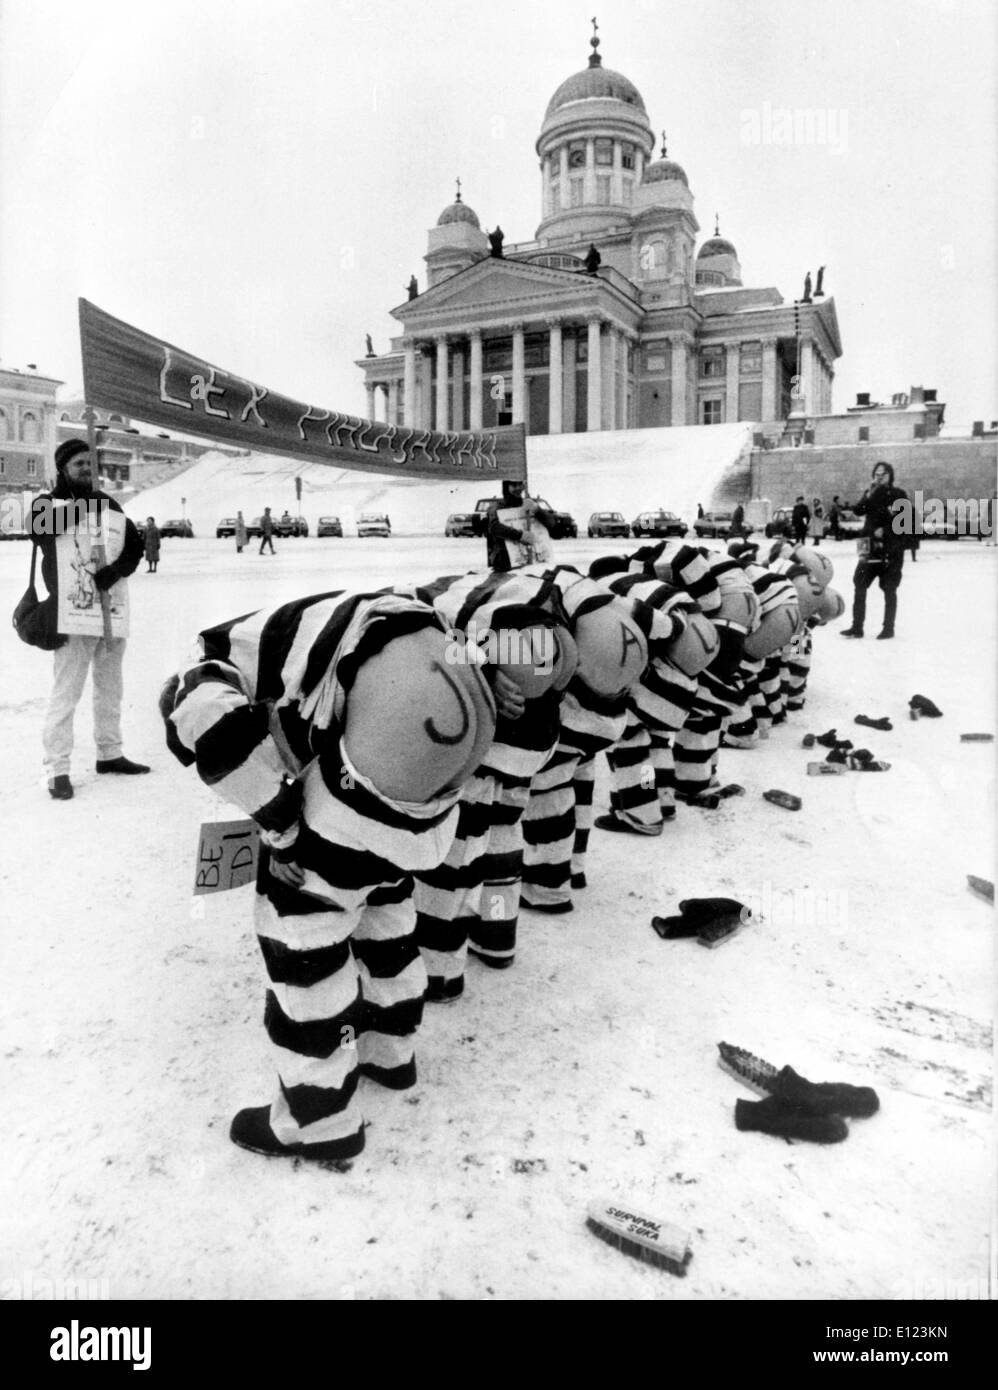 Feb 11, 1985; Helsinki, Finland; The Finish government want the military service to last longer. The action provoque the demosntration of this yooung guys in front of the parliament in Helsinki, dressed as convicts. This picture talks by itself. (Credit Image: KEYSTONE Pictures USA/ZUMAPRESS.com) Stock Photo